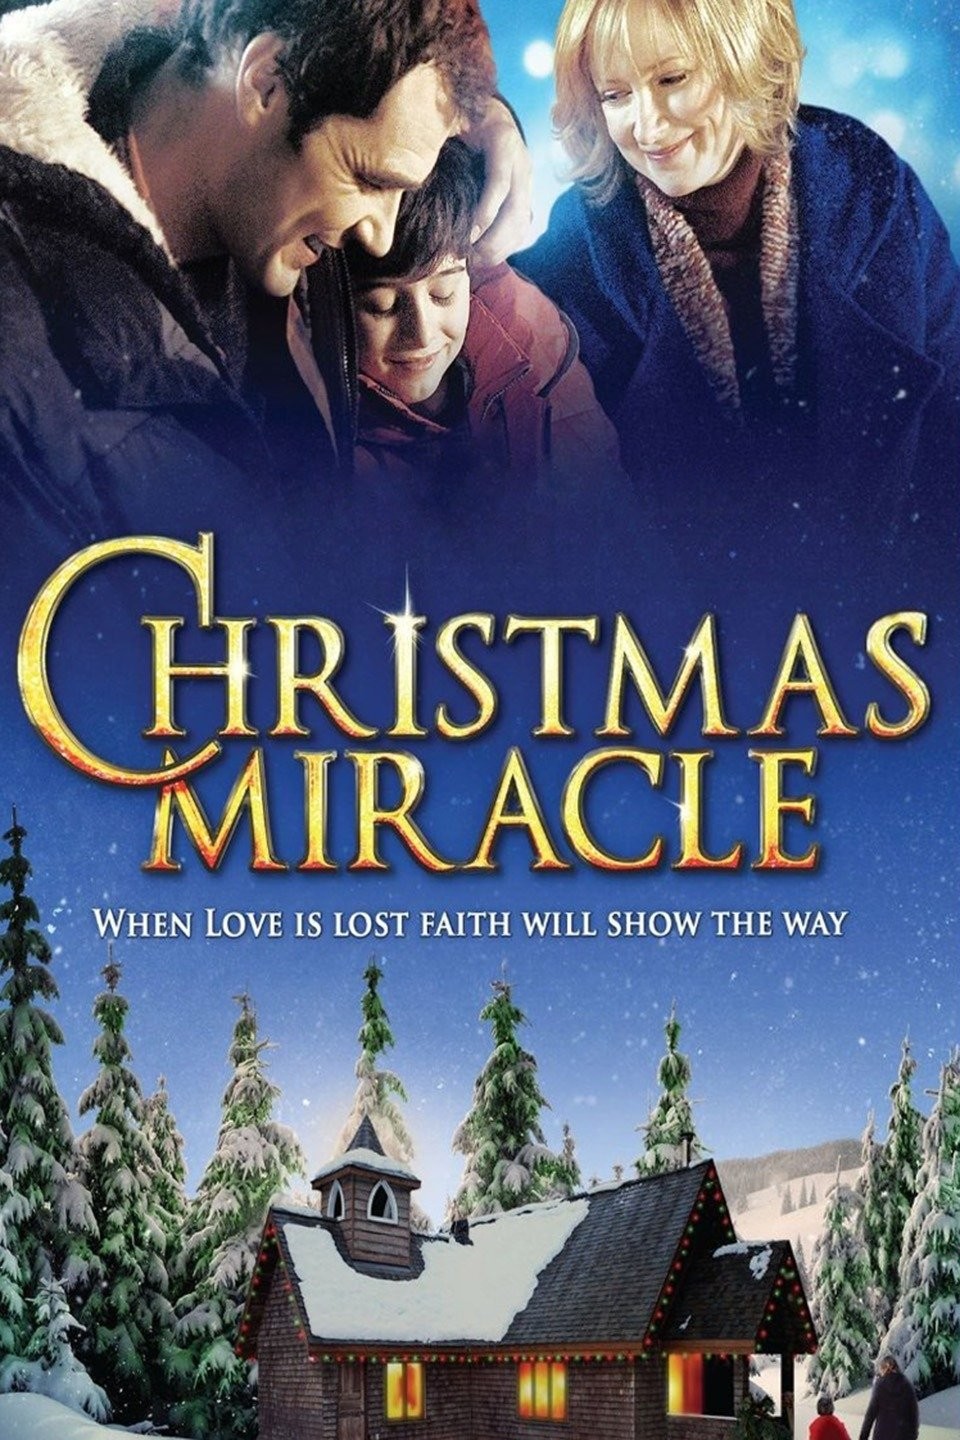 Miracle - Rotten Tomatoes